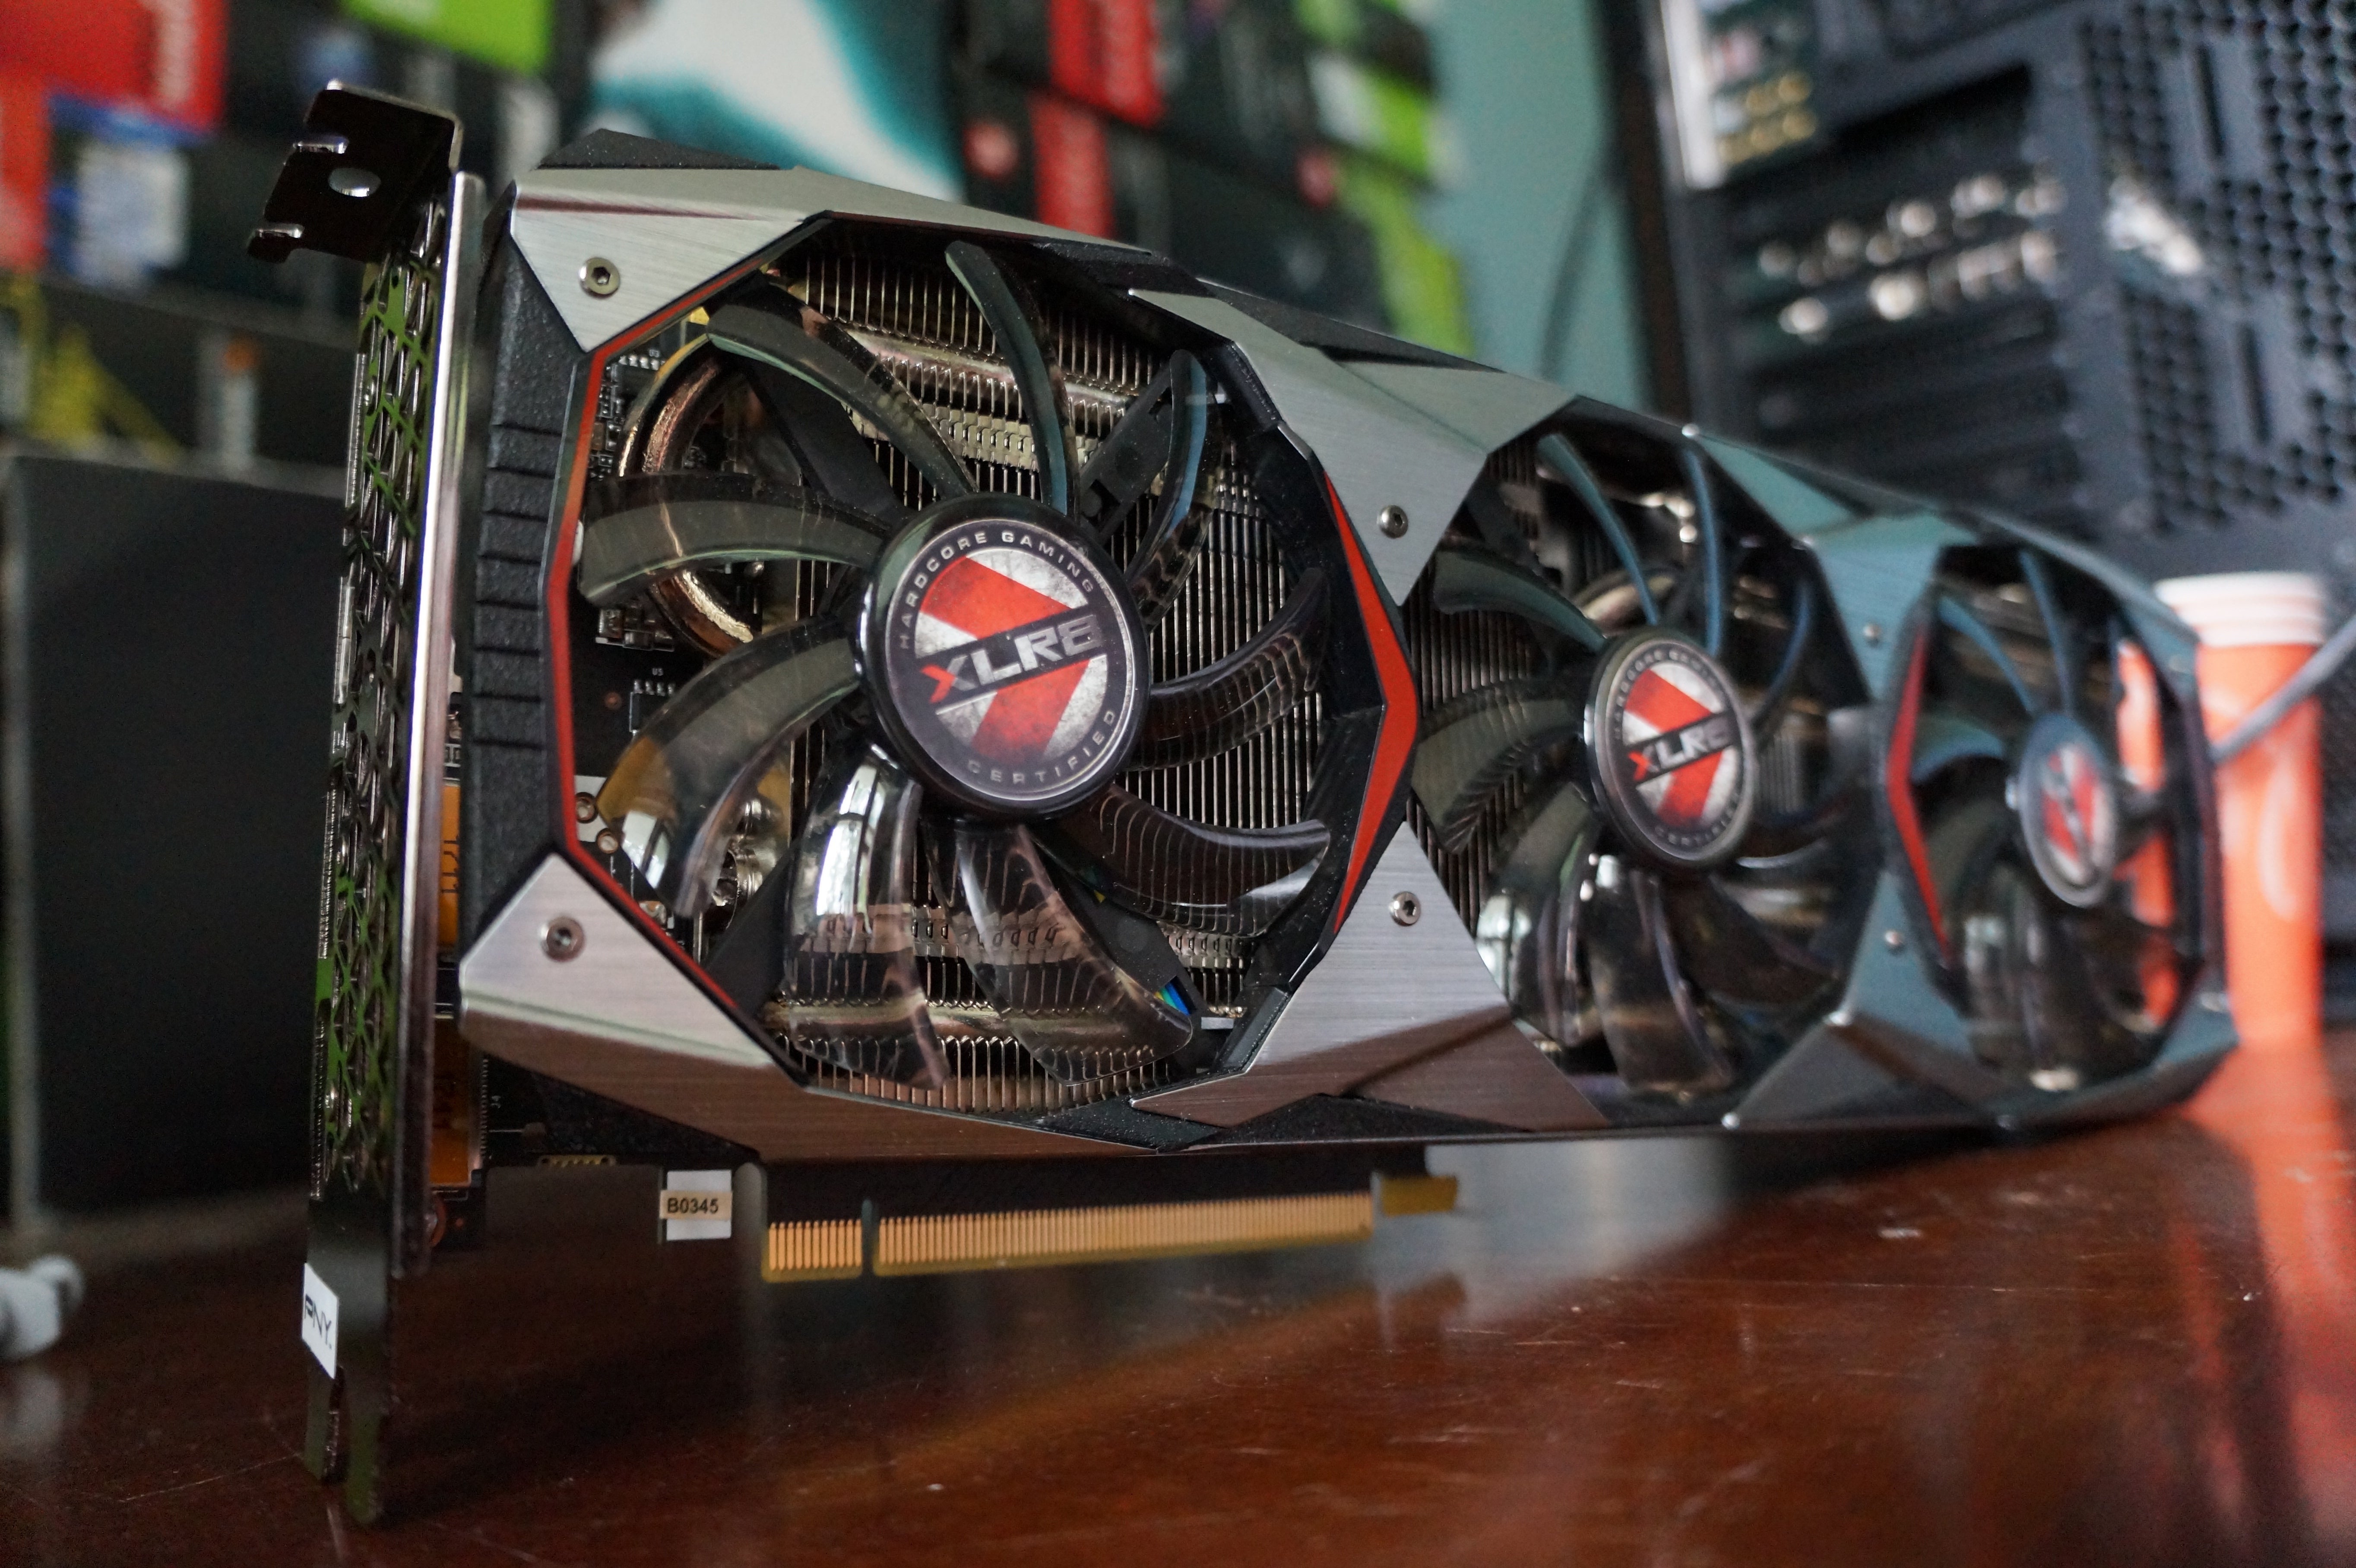 PNY GTX 1080 Ti XLR8 OC review: A gorgeous graphics card with